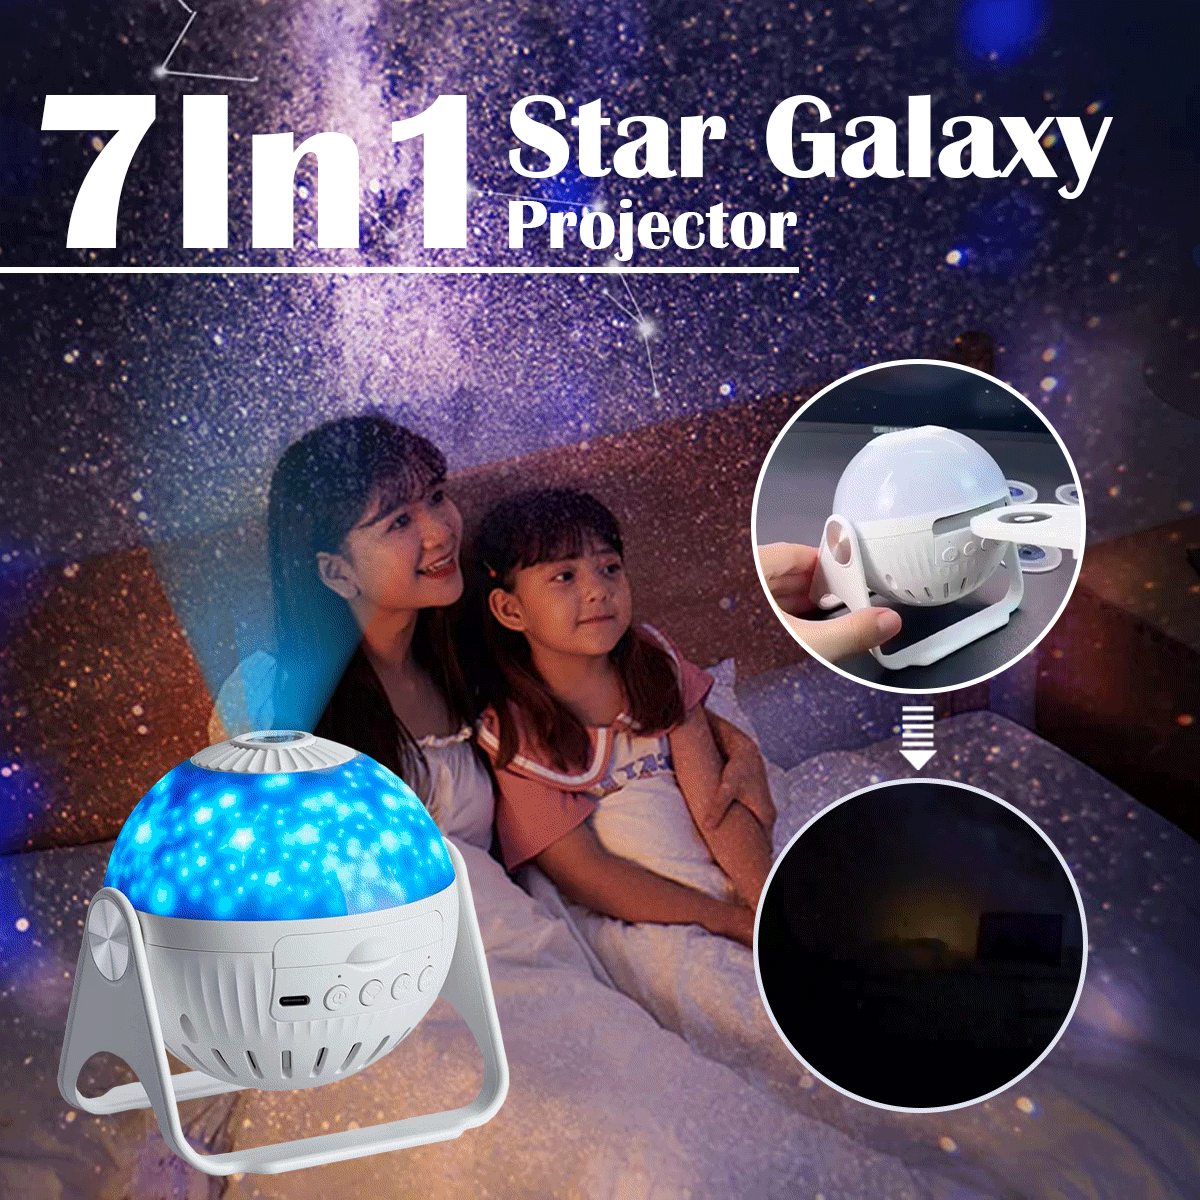 7 In 1 Star Galaxy Projector creating a captivating starry night sky on a bedroom ceiling